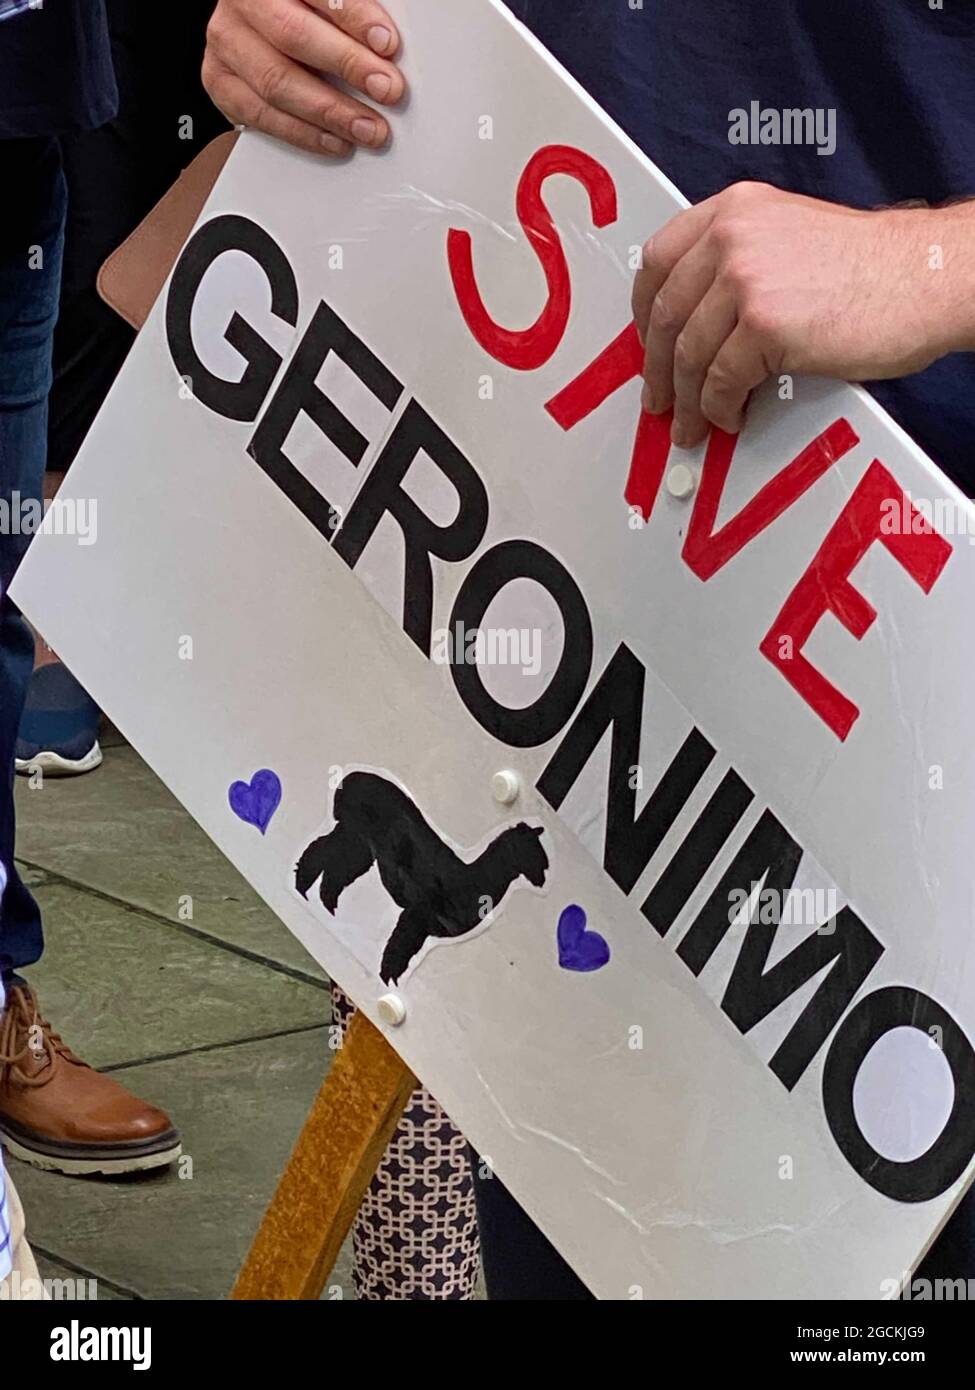 London, UK. 09th Aug, 2021. Demonstrators protest outside the Department of the Environment against the ordered euthanasia of alpaca Geronimo, one person holds a sign "Save Geronimo". With a protest march in London, supporters wanted to demonstrate for the rescue of Geronimo, an alpaca suspected of suffering from bovine tuberculosis. Credit: Benedikt von Imhoff/dpa/Alamy Live News Stock Photo